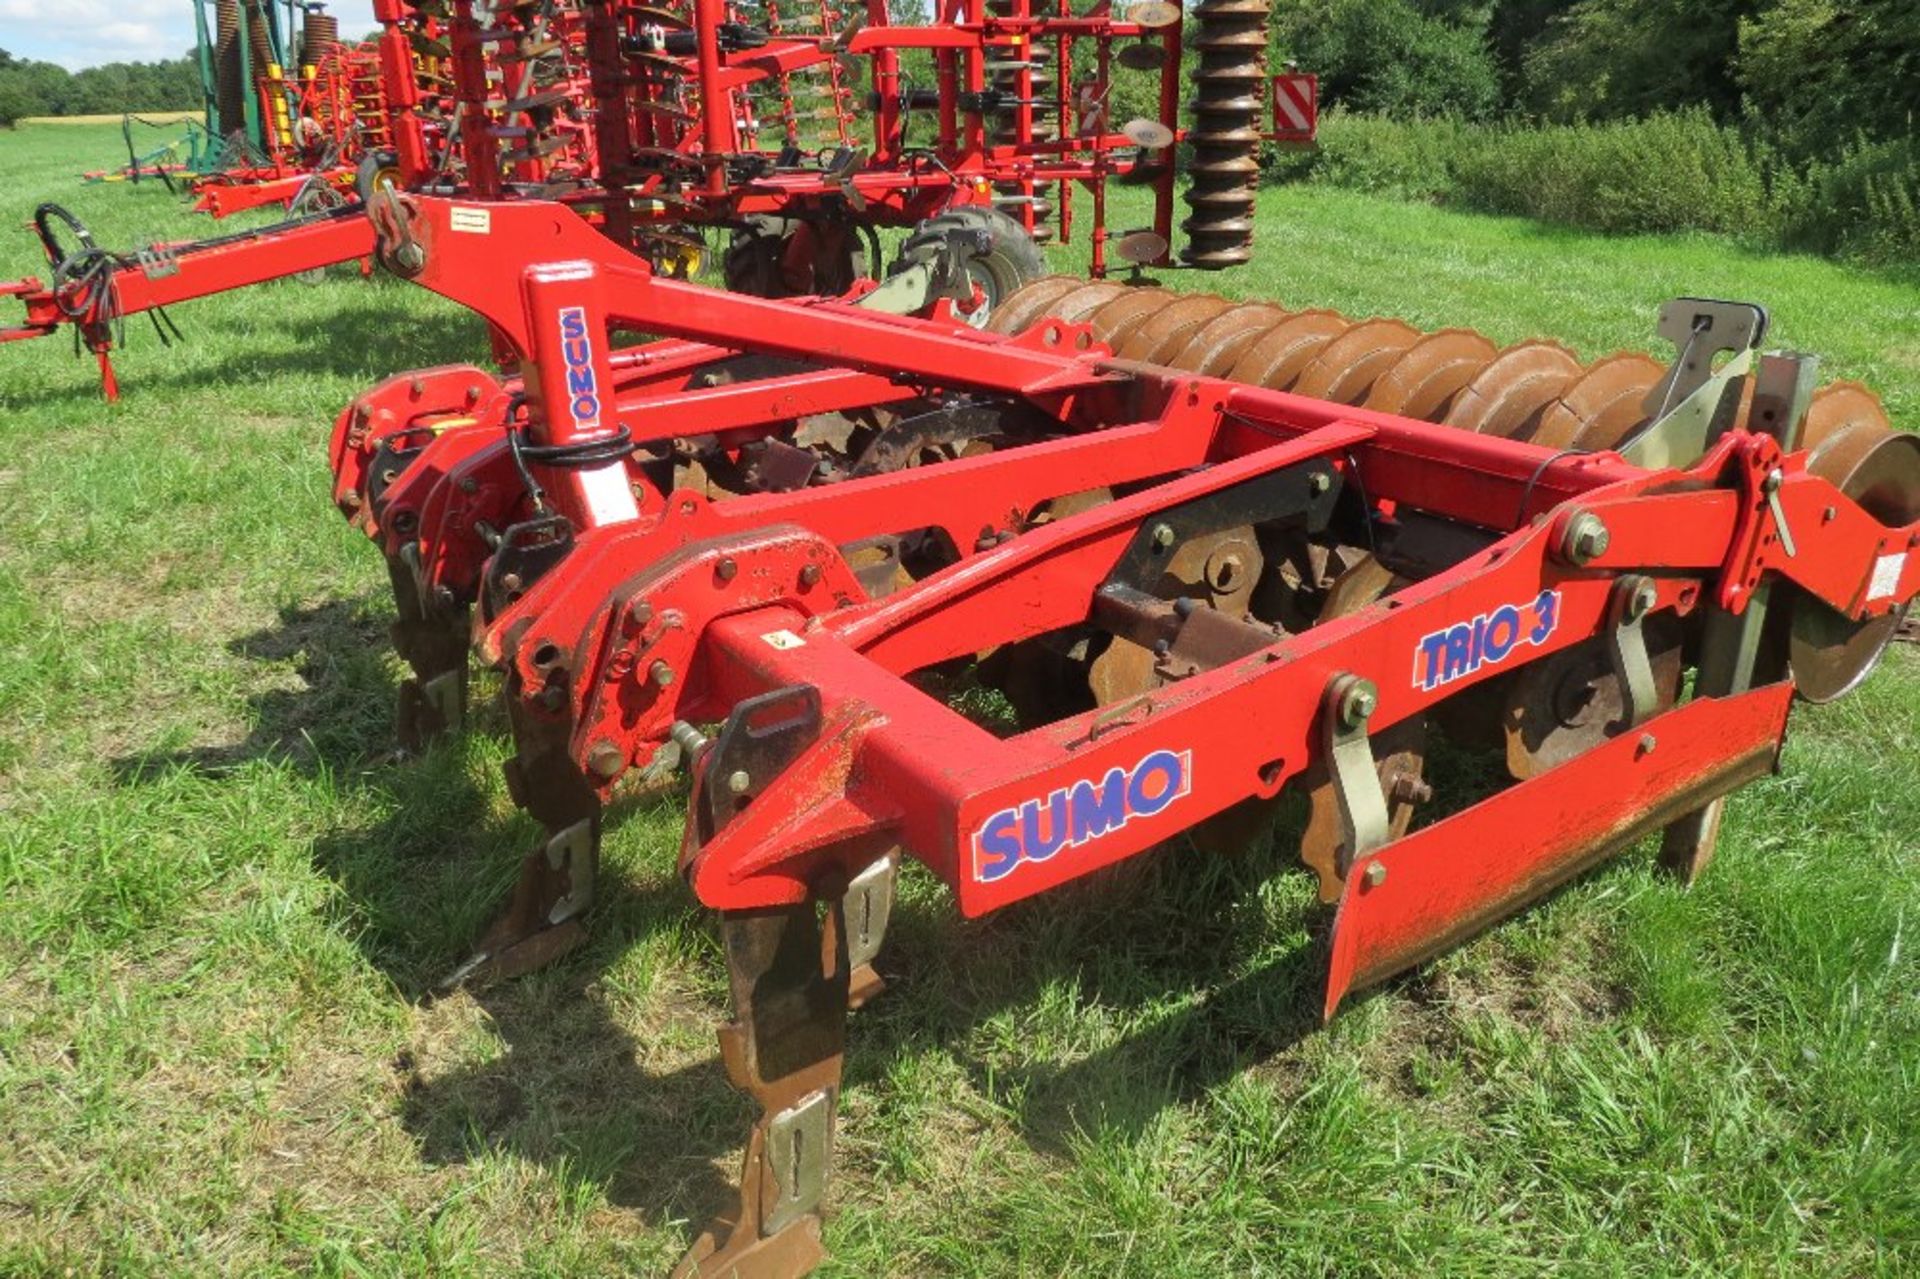 Sumo Trio 3m Cultivator, 6 Leg Cultivator, Discs, Packer Roll, Stand, - Image 11 of 13